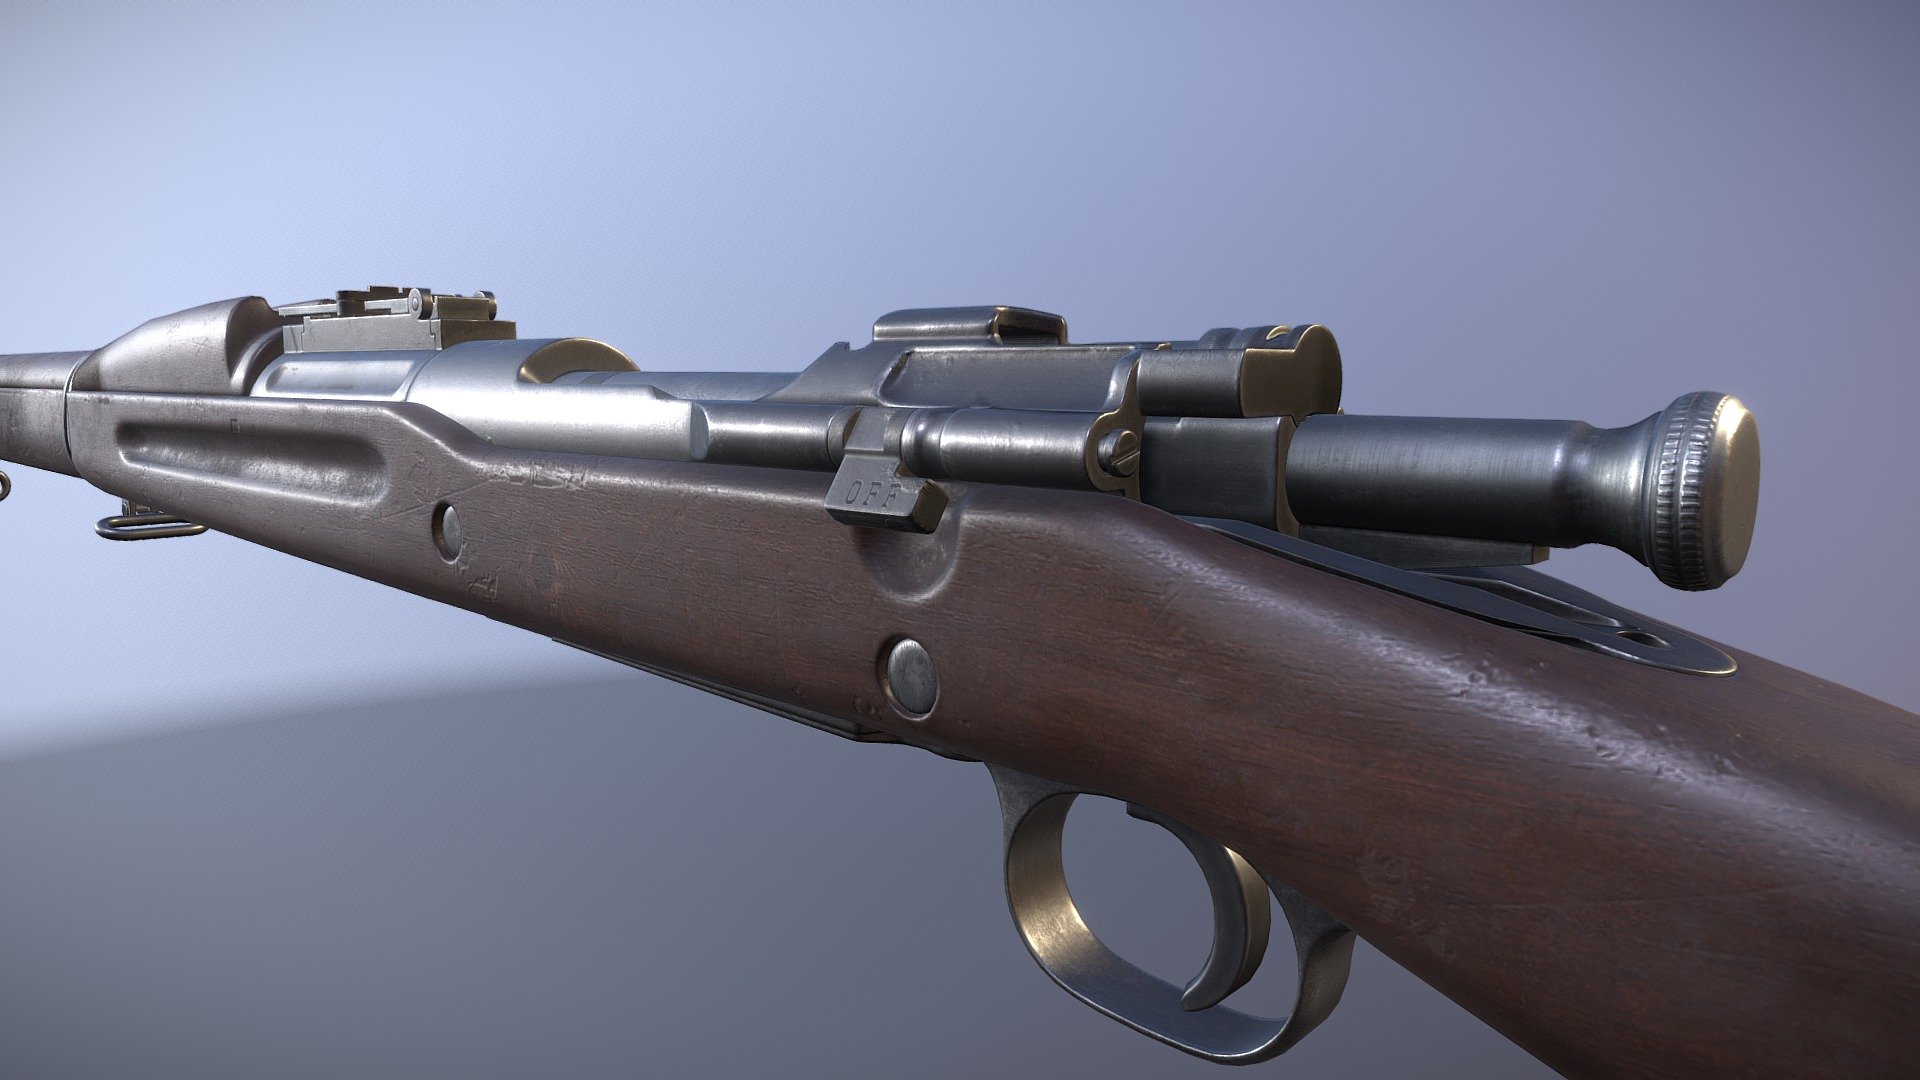 Game-ready M1903A3 Rifle designed for PBR engines.

Originally modeled in 3ds Max 2018. Download includes .max, .fbx, .obj, metal/roughness PBR textures, specular/gloss PBR textures, textures for Unity and Unreal Engines, and additional texture maps such as curvature, AO, and color ID.

Specs

Model ready for animation. Movable objects include: bolt, bolt sleeve, trigger, cocking piece, rear sight ladder, and rear sight aperture. Other parts such as the safety, magazine cut-off, and sling swivels can also be moved, but I did not make them separate objects by default.

Approximate dimensions: 109cm x 6cm x 21cm

Model is triangulated, no n-gons. A quaded version is included in the download. 7.62x51 NATO cartridge included.

Textures

4096x4096 set for the rifle and stripper clip
512x512 set for the 30-06 cartridge

Unity Engine 5 Textures: AlbedoTransparency, MetallicSmoothness, Normal, Occlusion
Unreal Engine 4 Textures: BaseColor, Normal, RoughnessMetallicAO - M1903A3 Rifle - Buy Royalty Free 3D model by Luchador (@Luchador90) 3d model